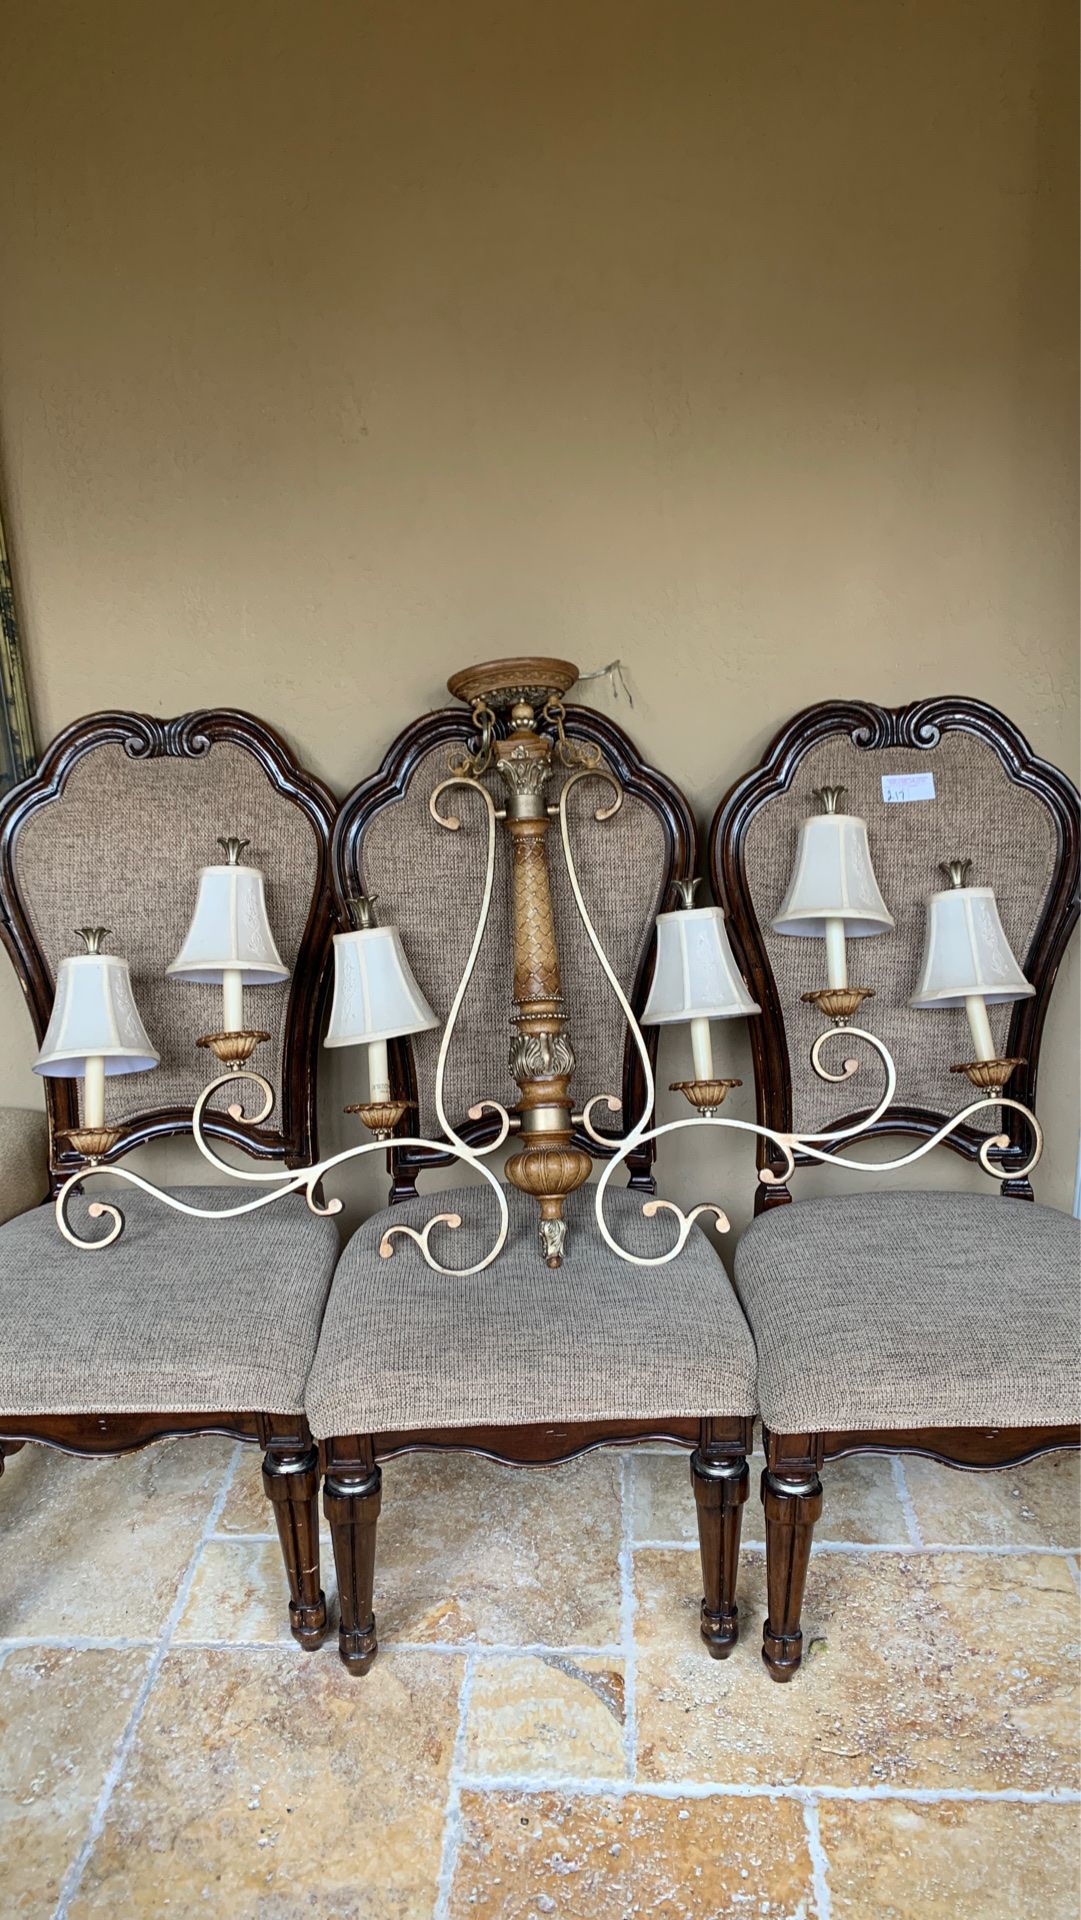 6 light chandelier in mint condition